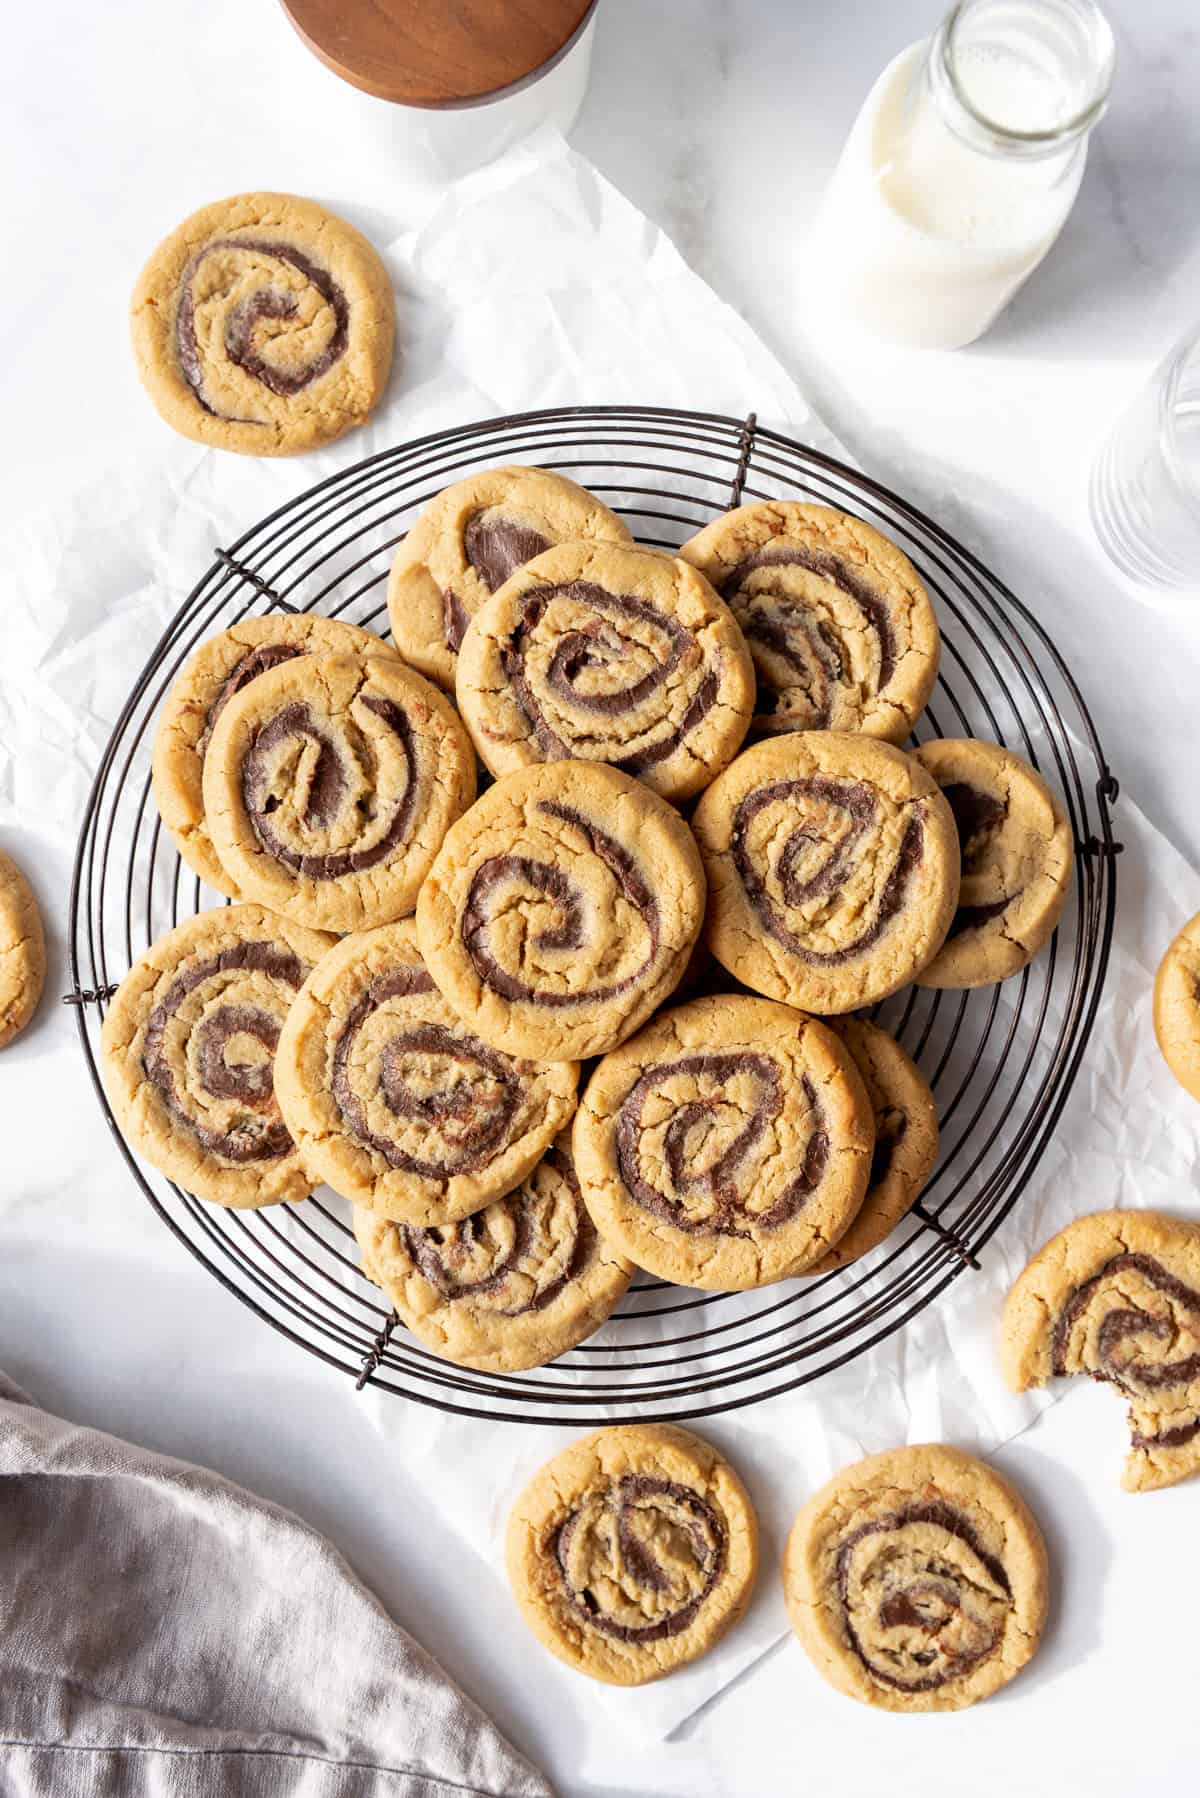 Swirls of chocolate filling in peanut butter cookies arranged on a cooling rack over parchment paper.